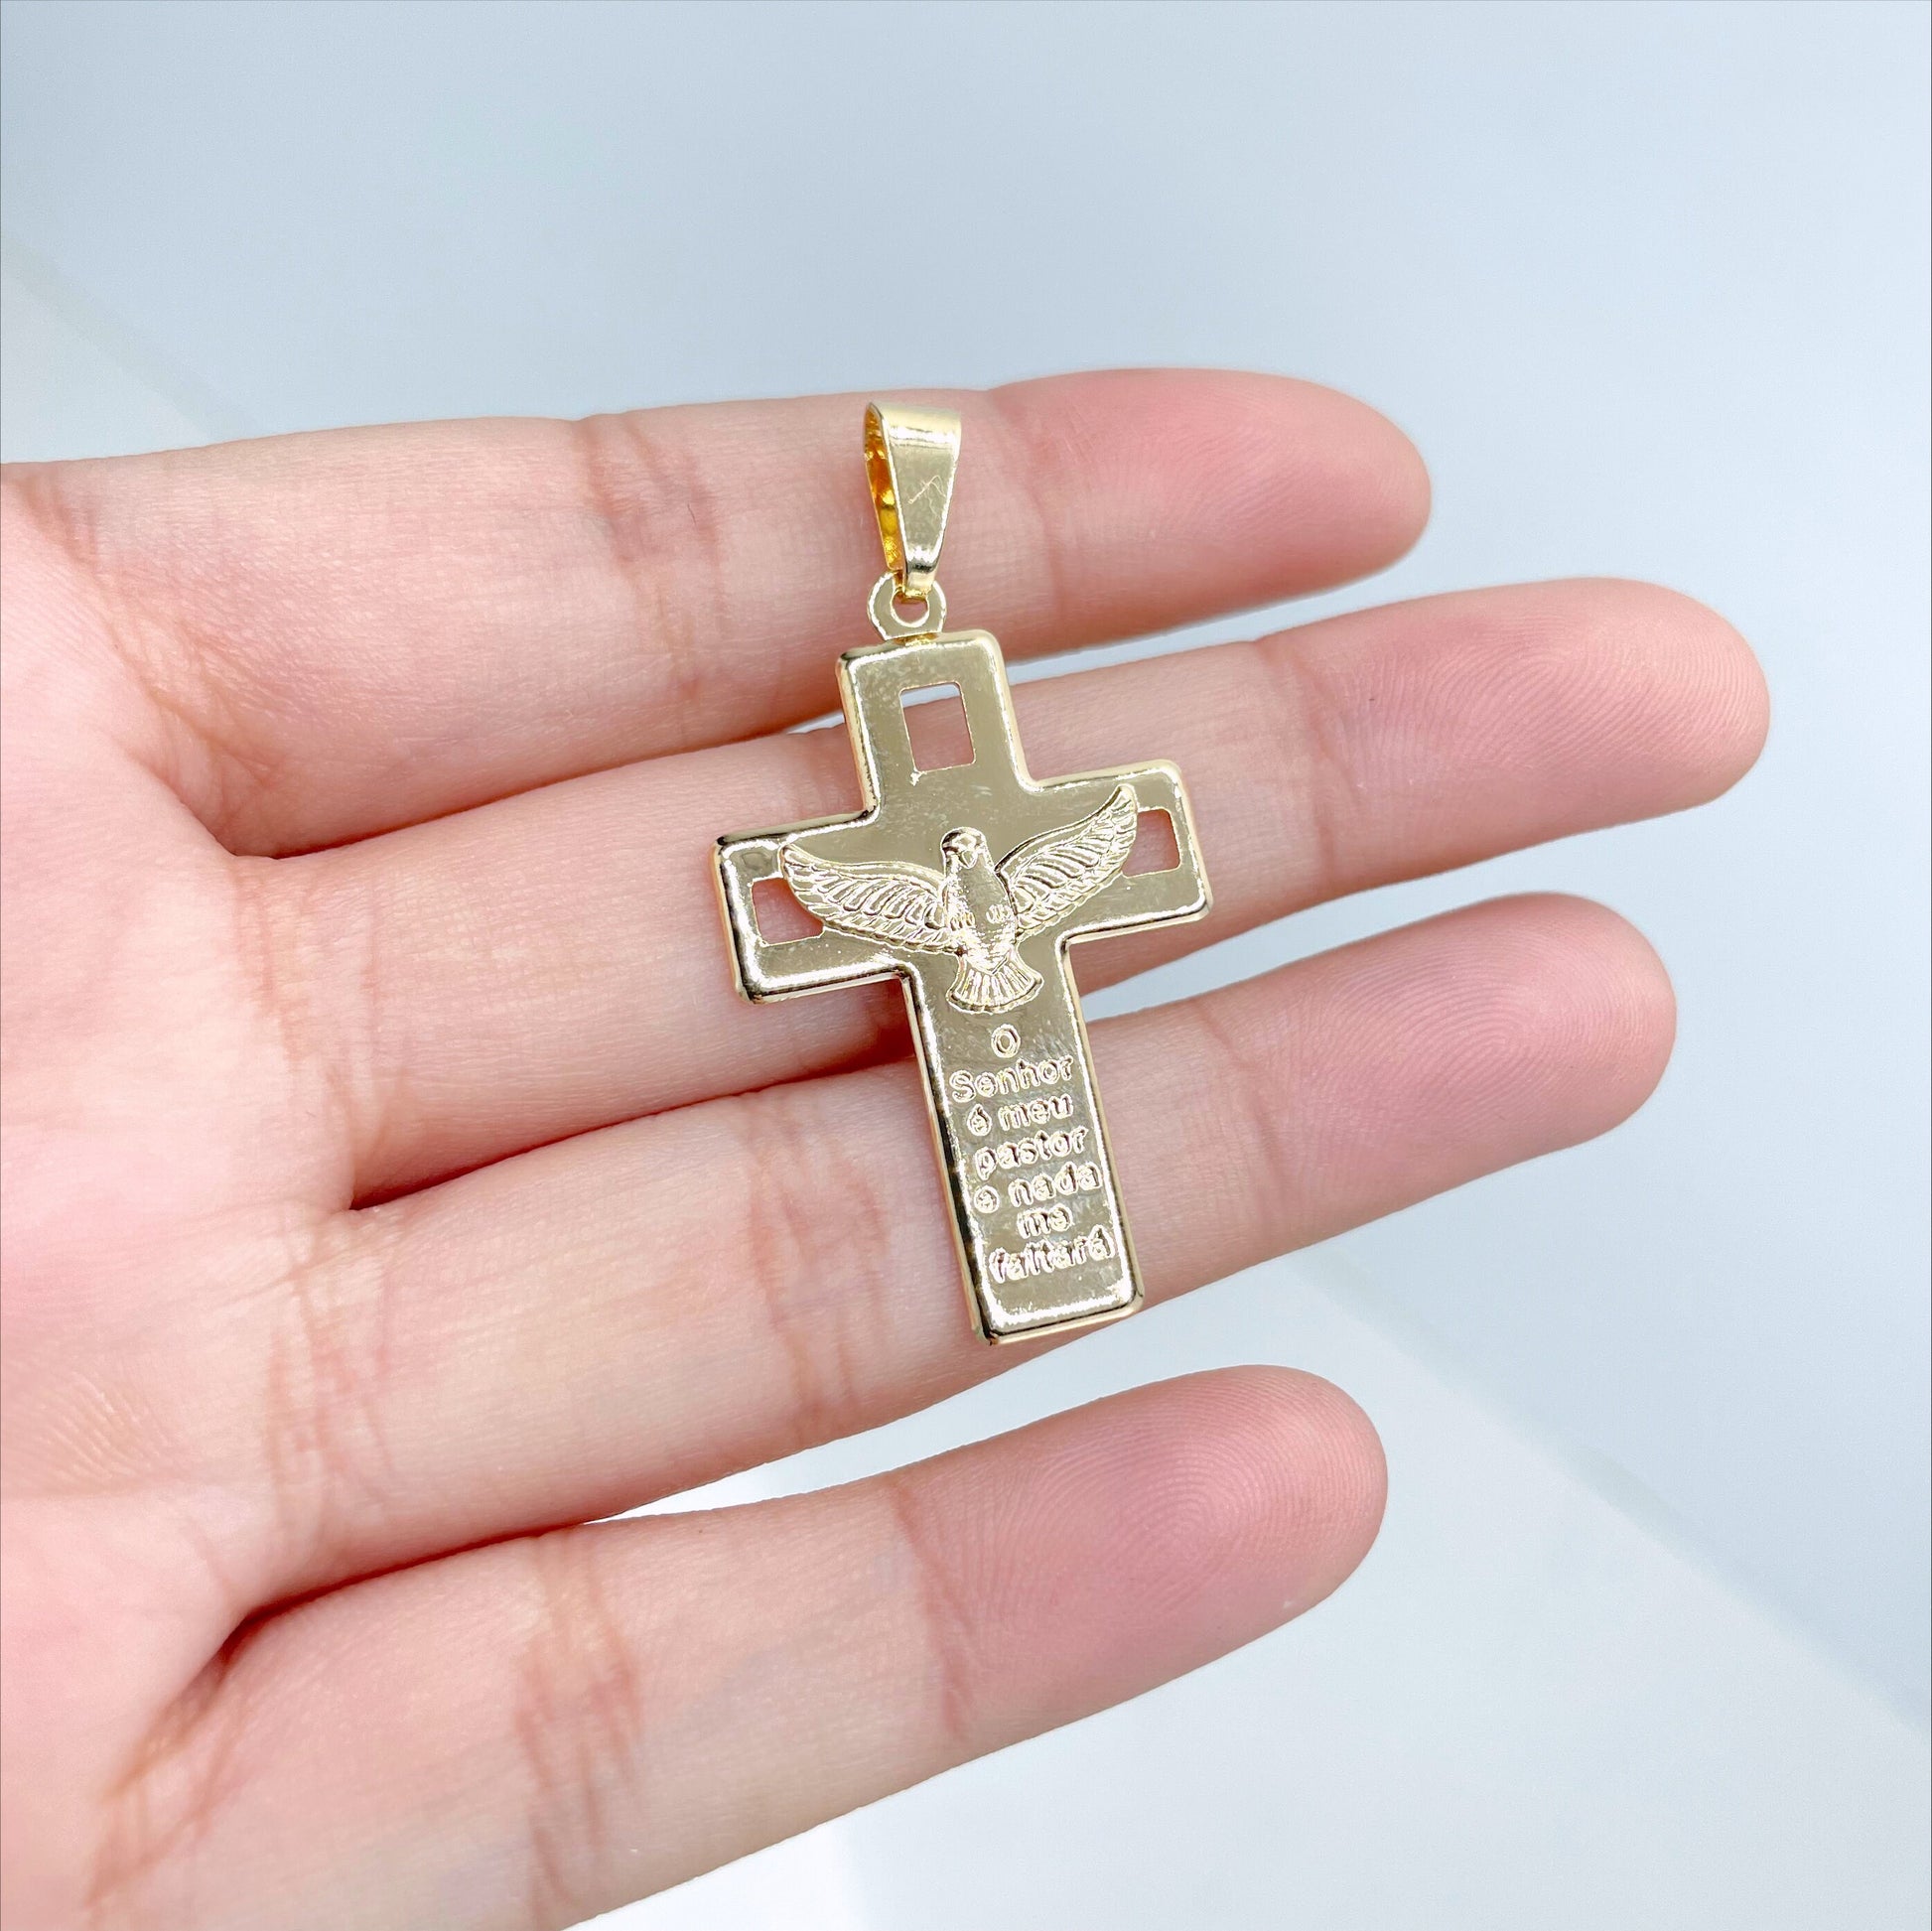 18K Gold Filled Cross Charms Pendant with Dove & Portuguese Bible 23 Psalm description, Wholesale Jewelry Making Supplies